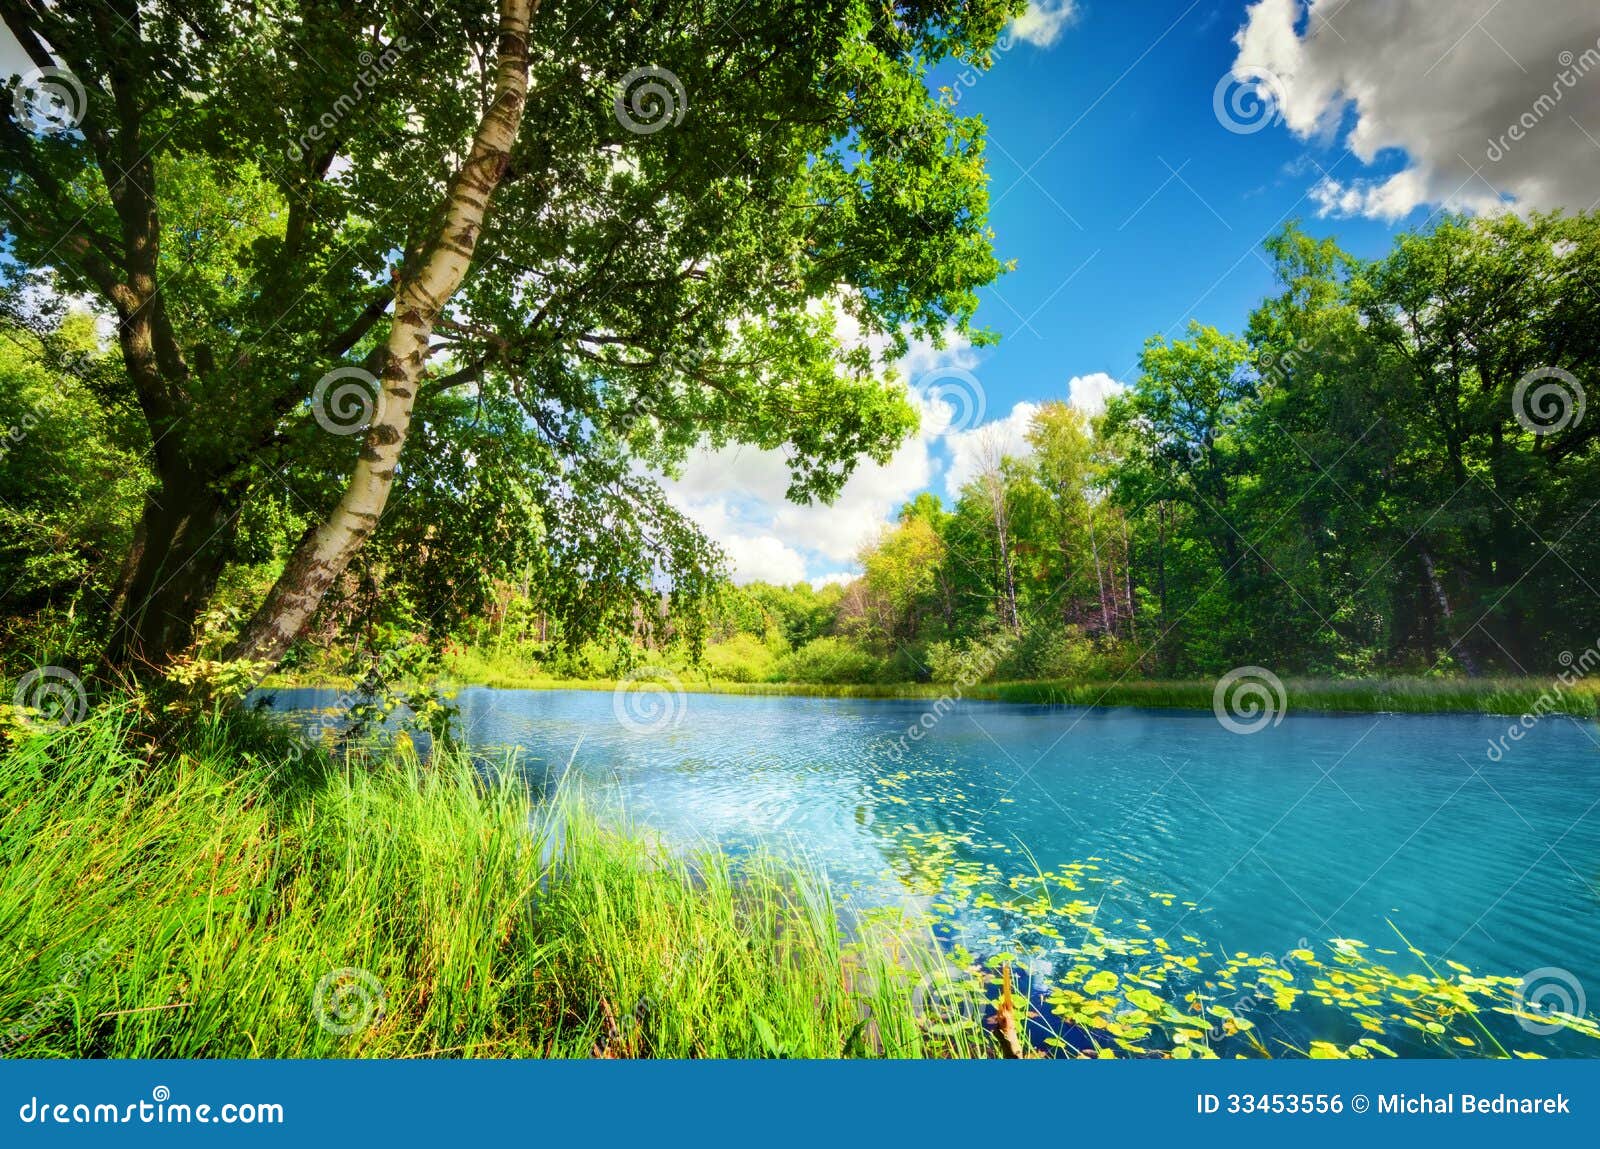 clean lake in green spring summer forest